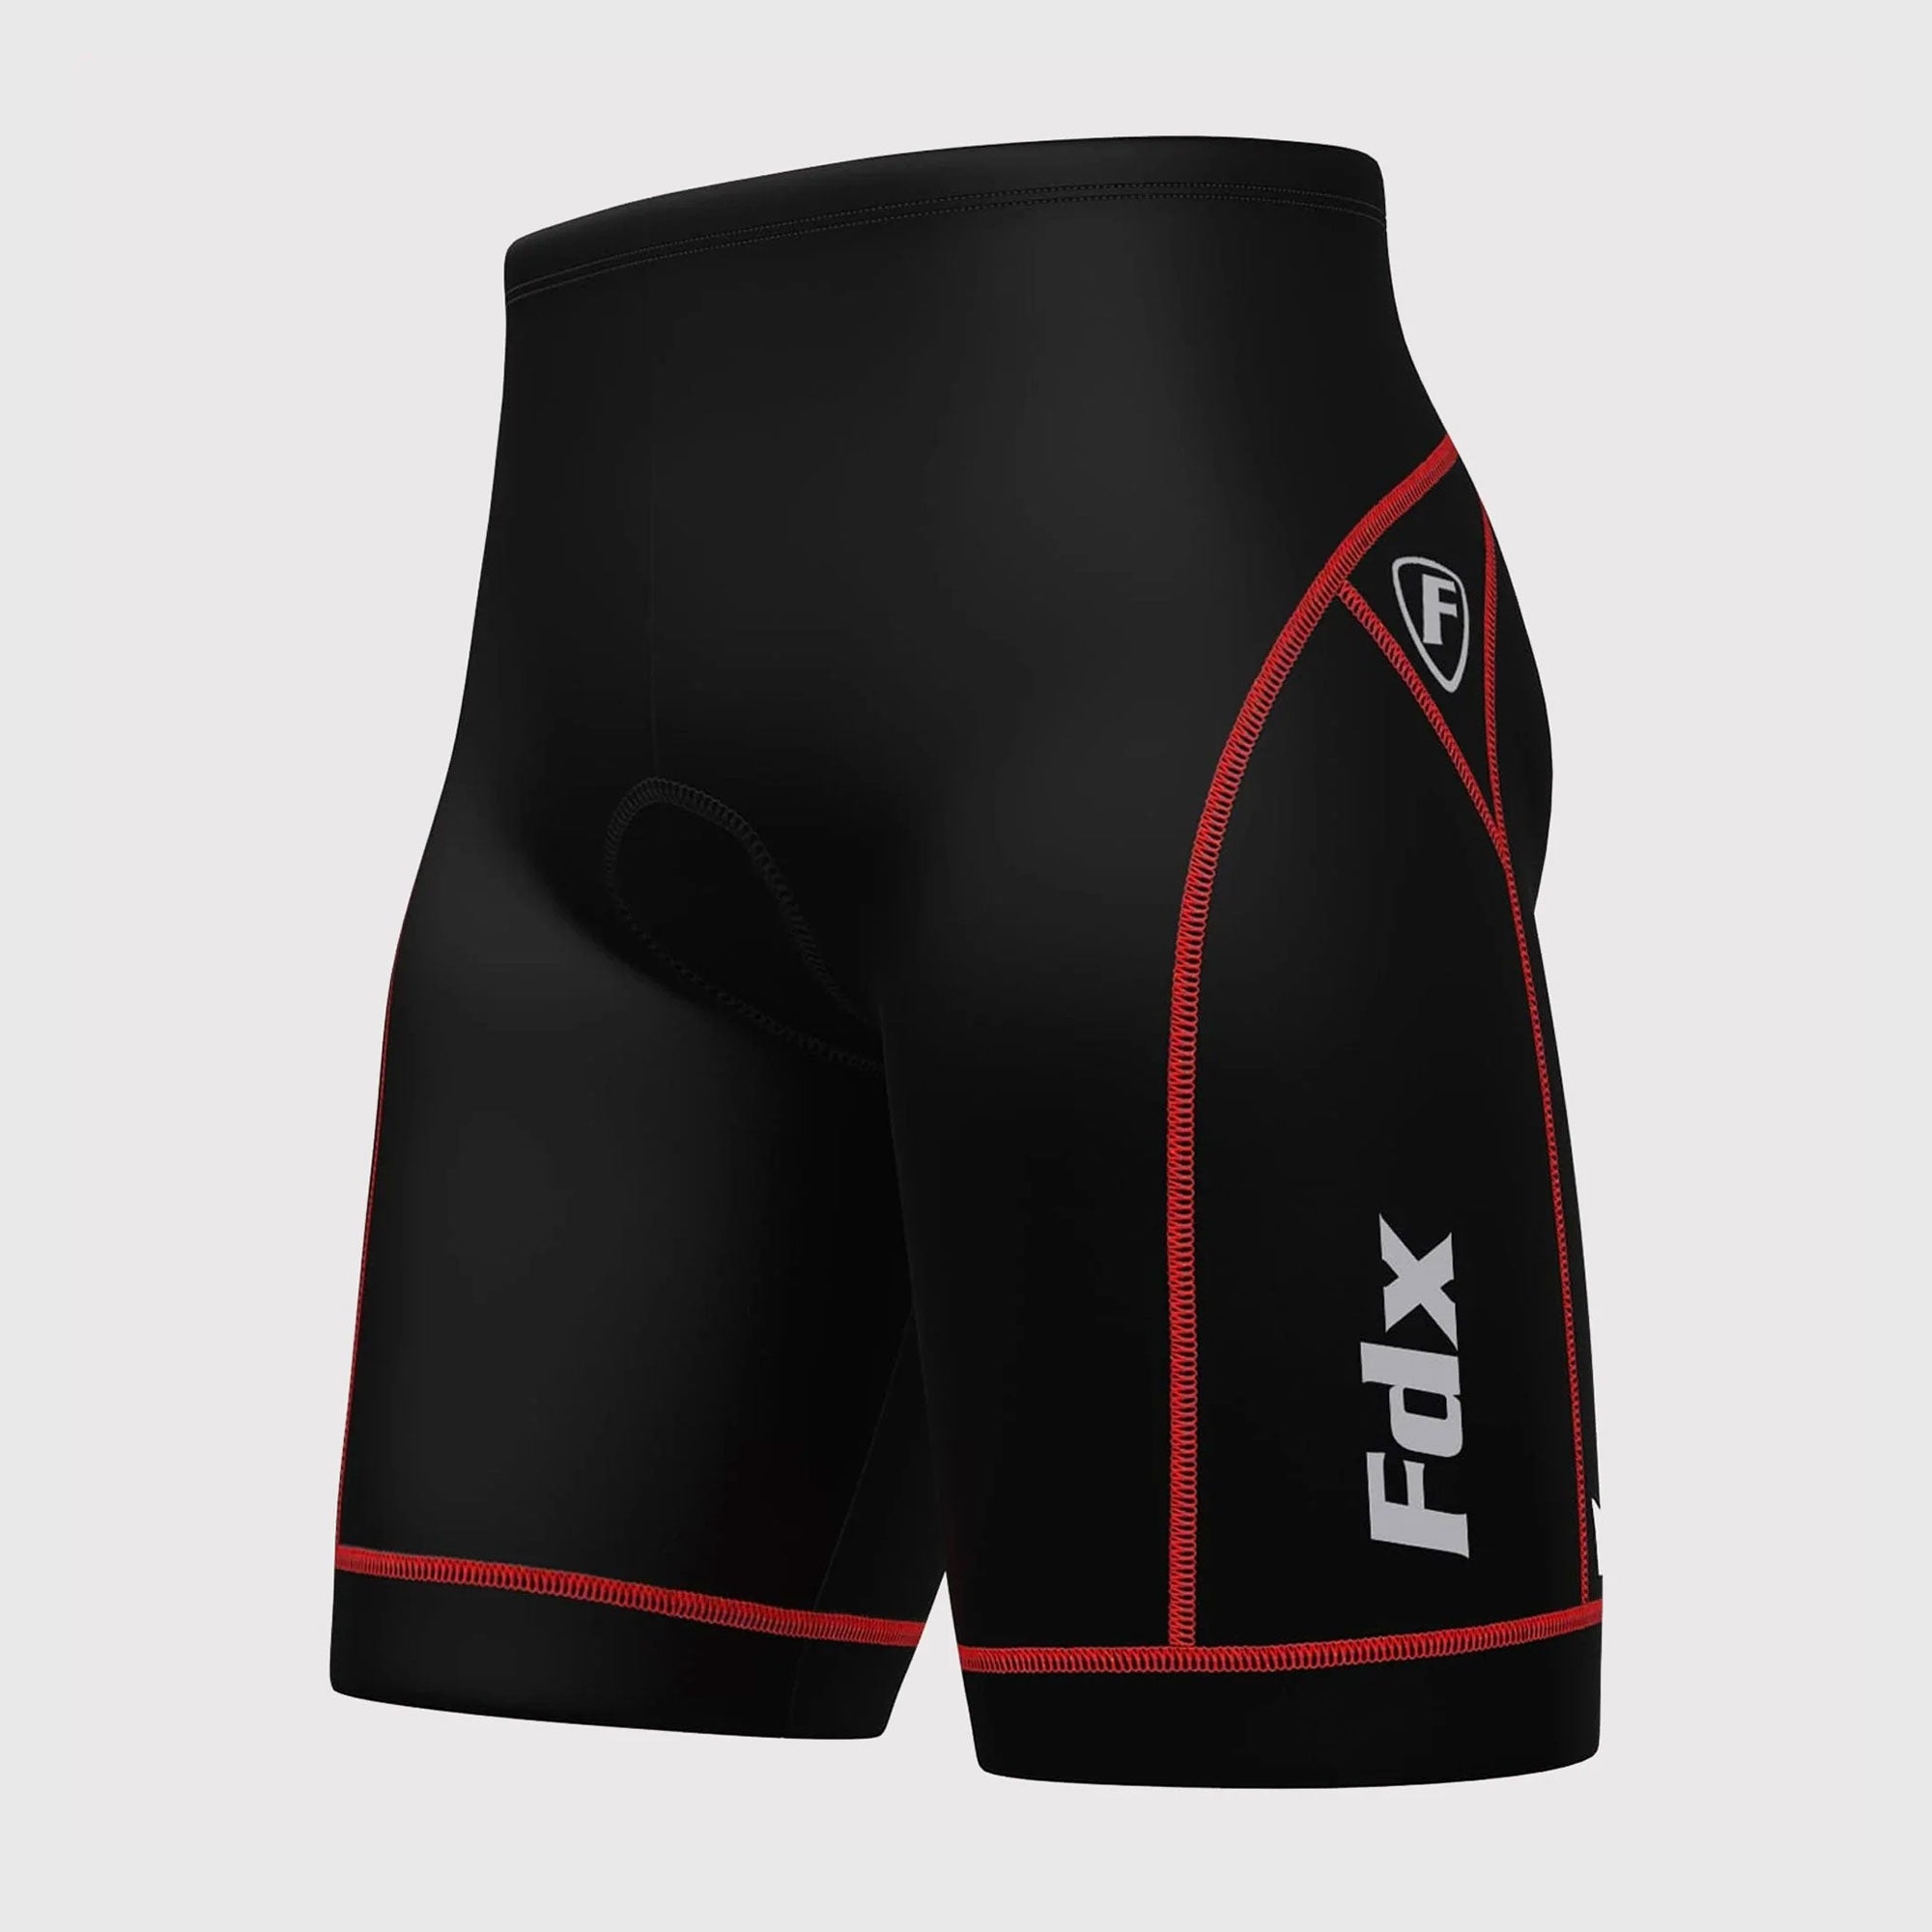 Fdx Men's Black & Red Gel Padded Cycling Shorts for Summer Best Outdoor Knickers Road Bike Short Length Pants - Ridest